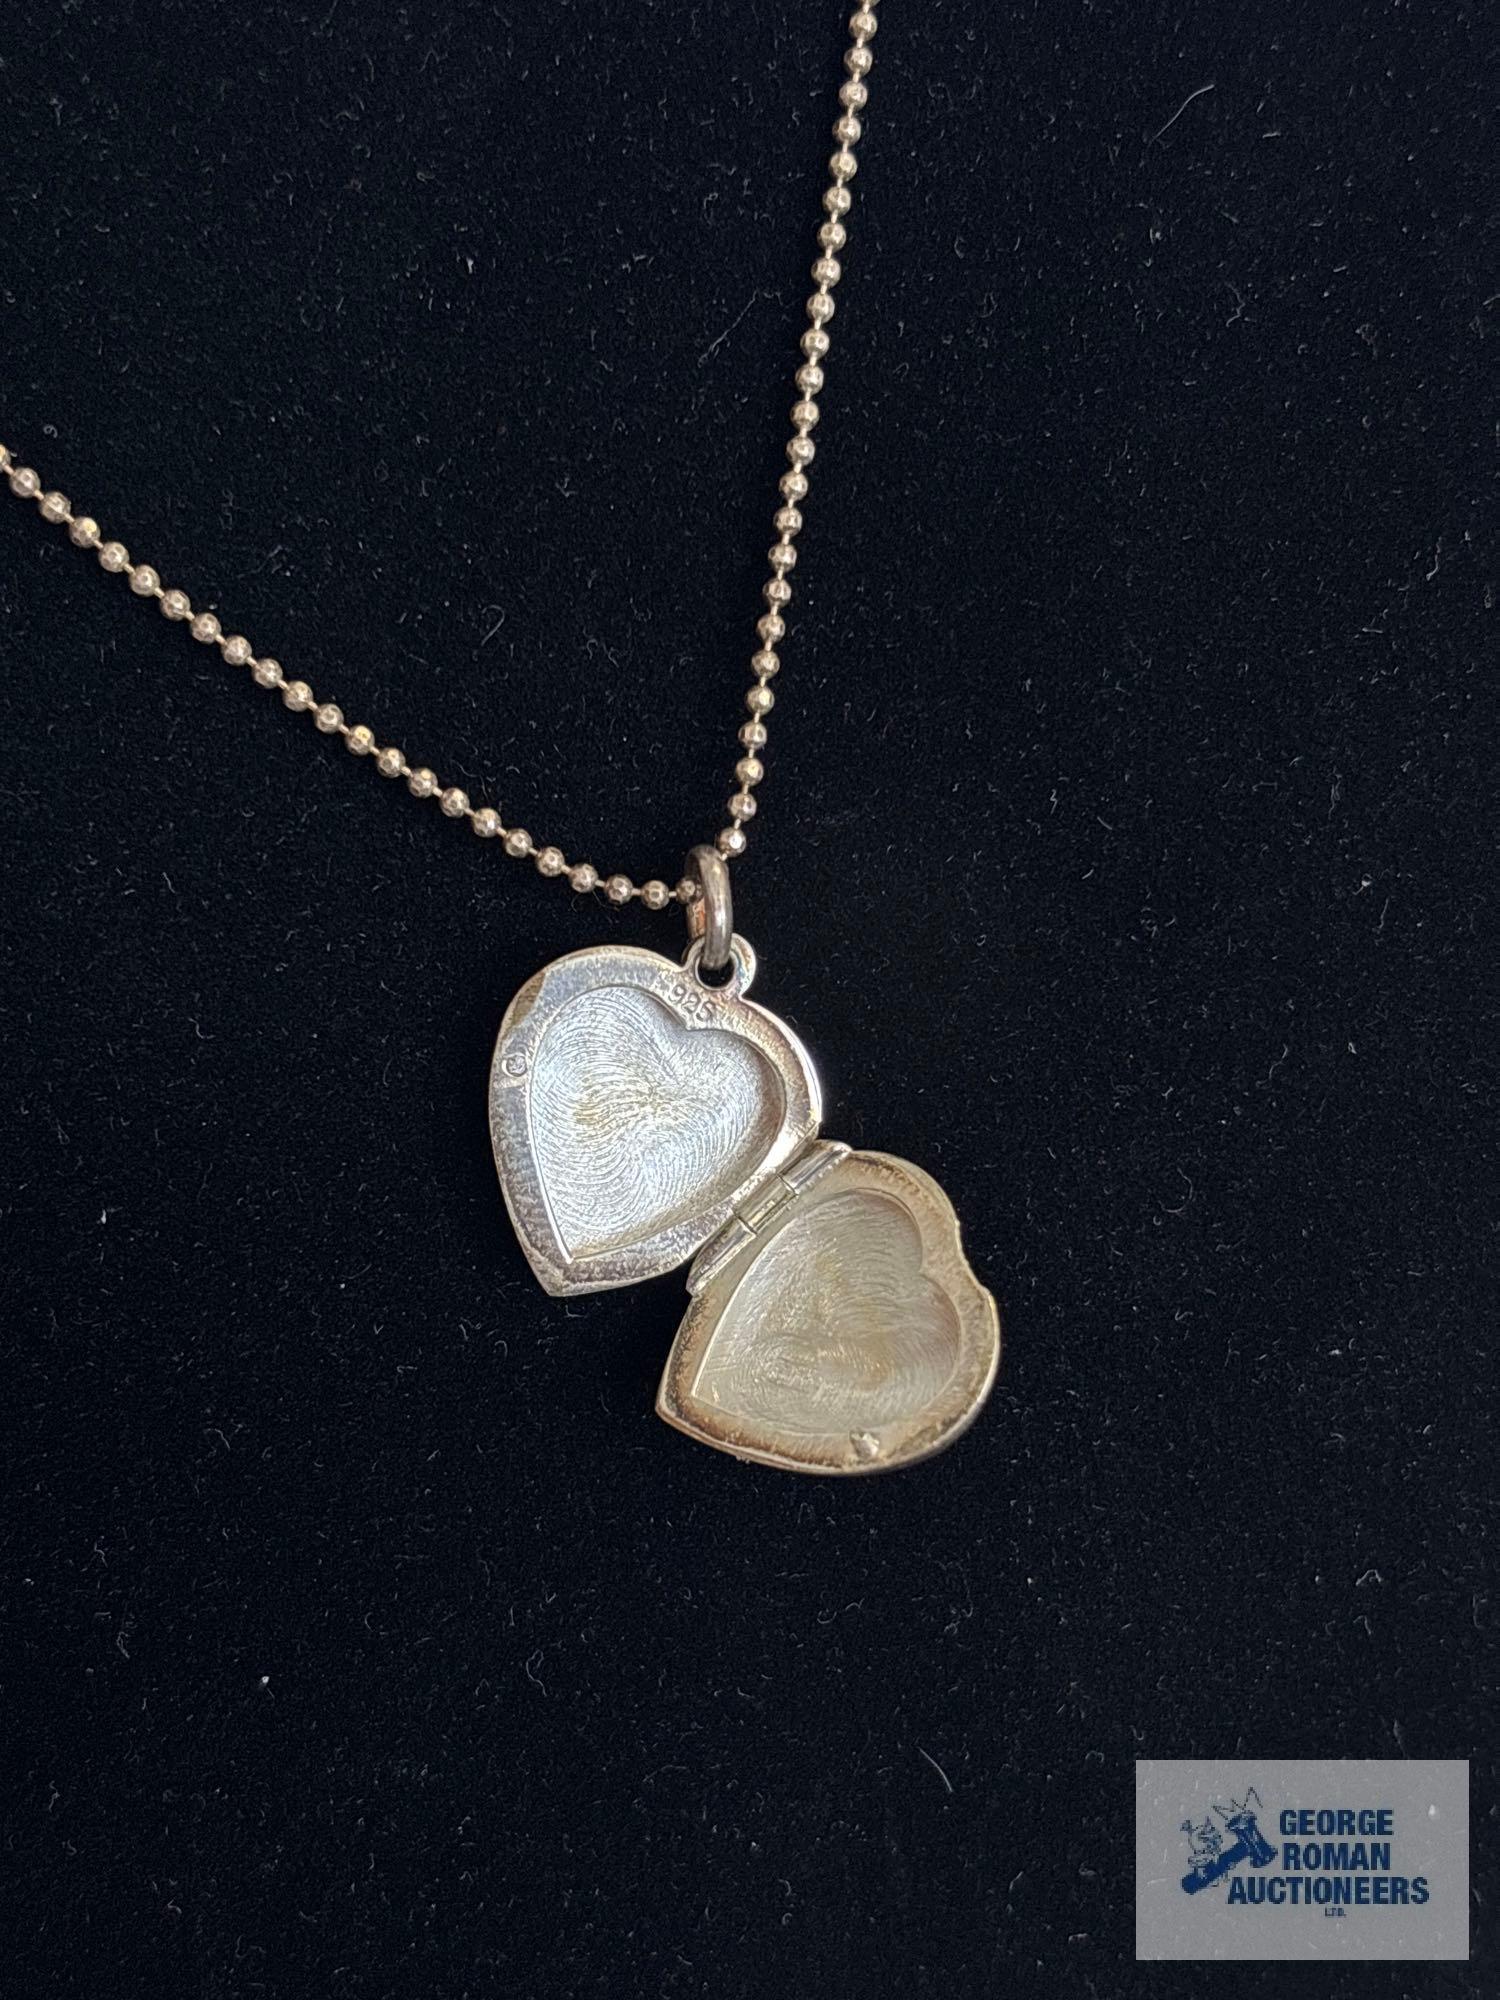 Silver colored heart-shaped locket, marked 925, on silver colored bead like necklace, marked 925